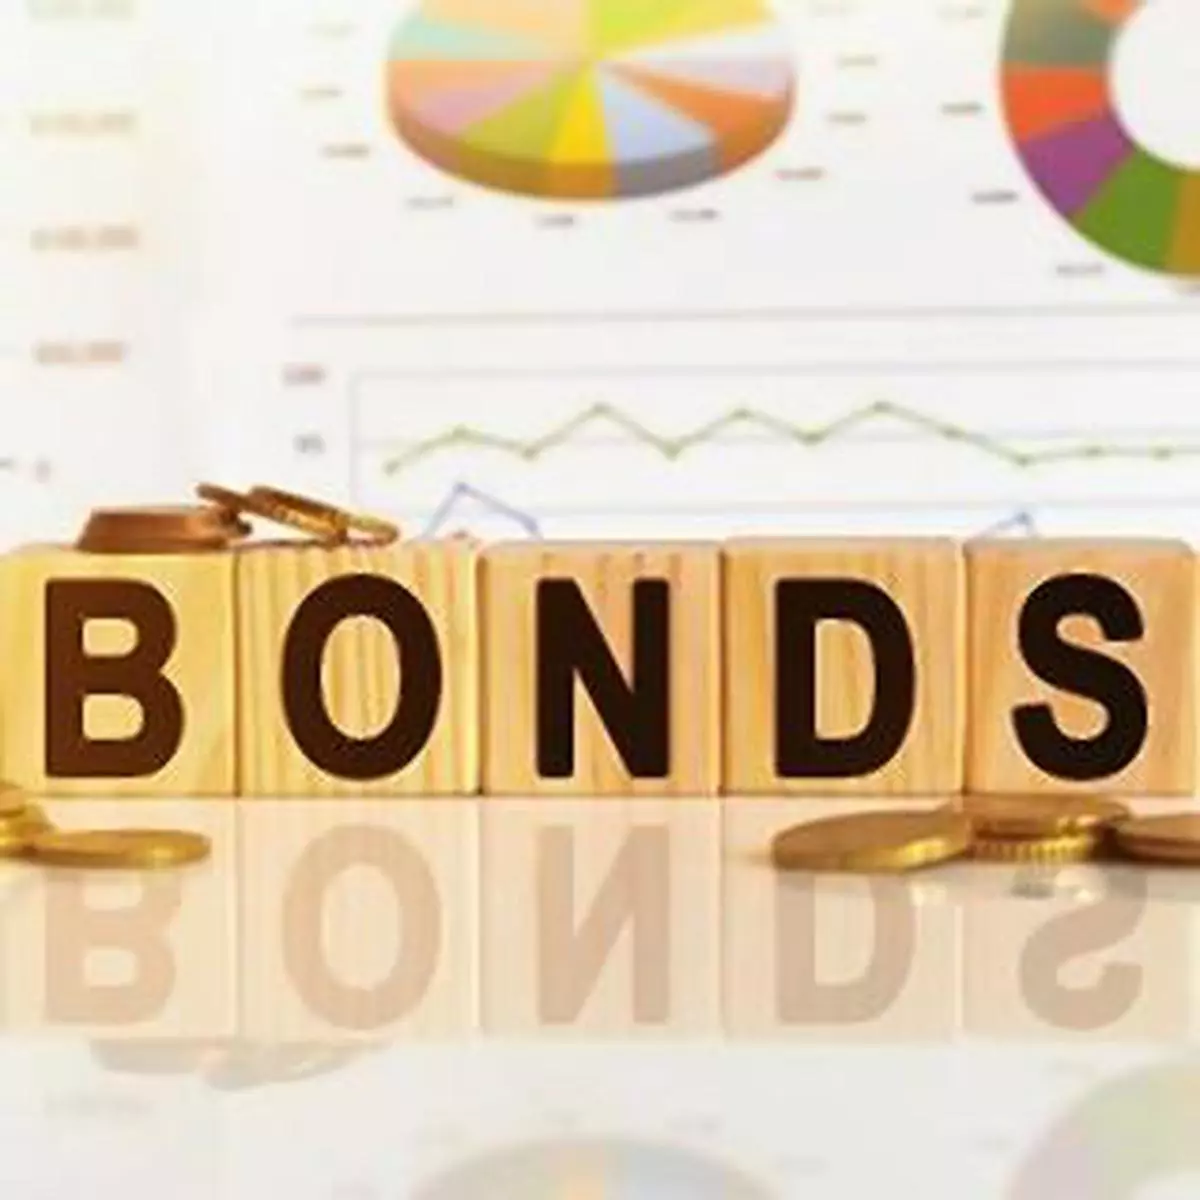 Bonds the word on wooden cubes, cubes stand on a reflective surface, in the background is a business diagram. Business and finance concept